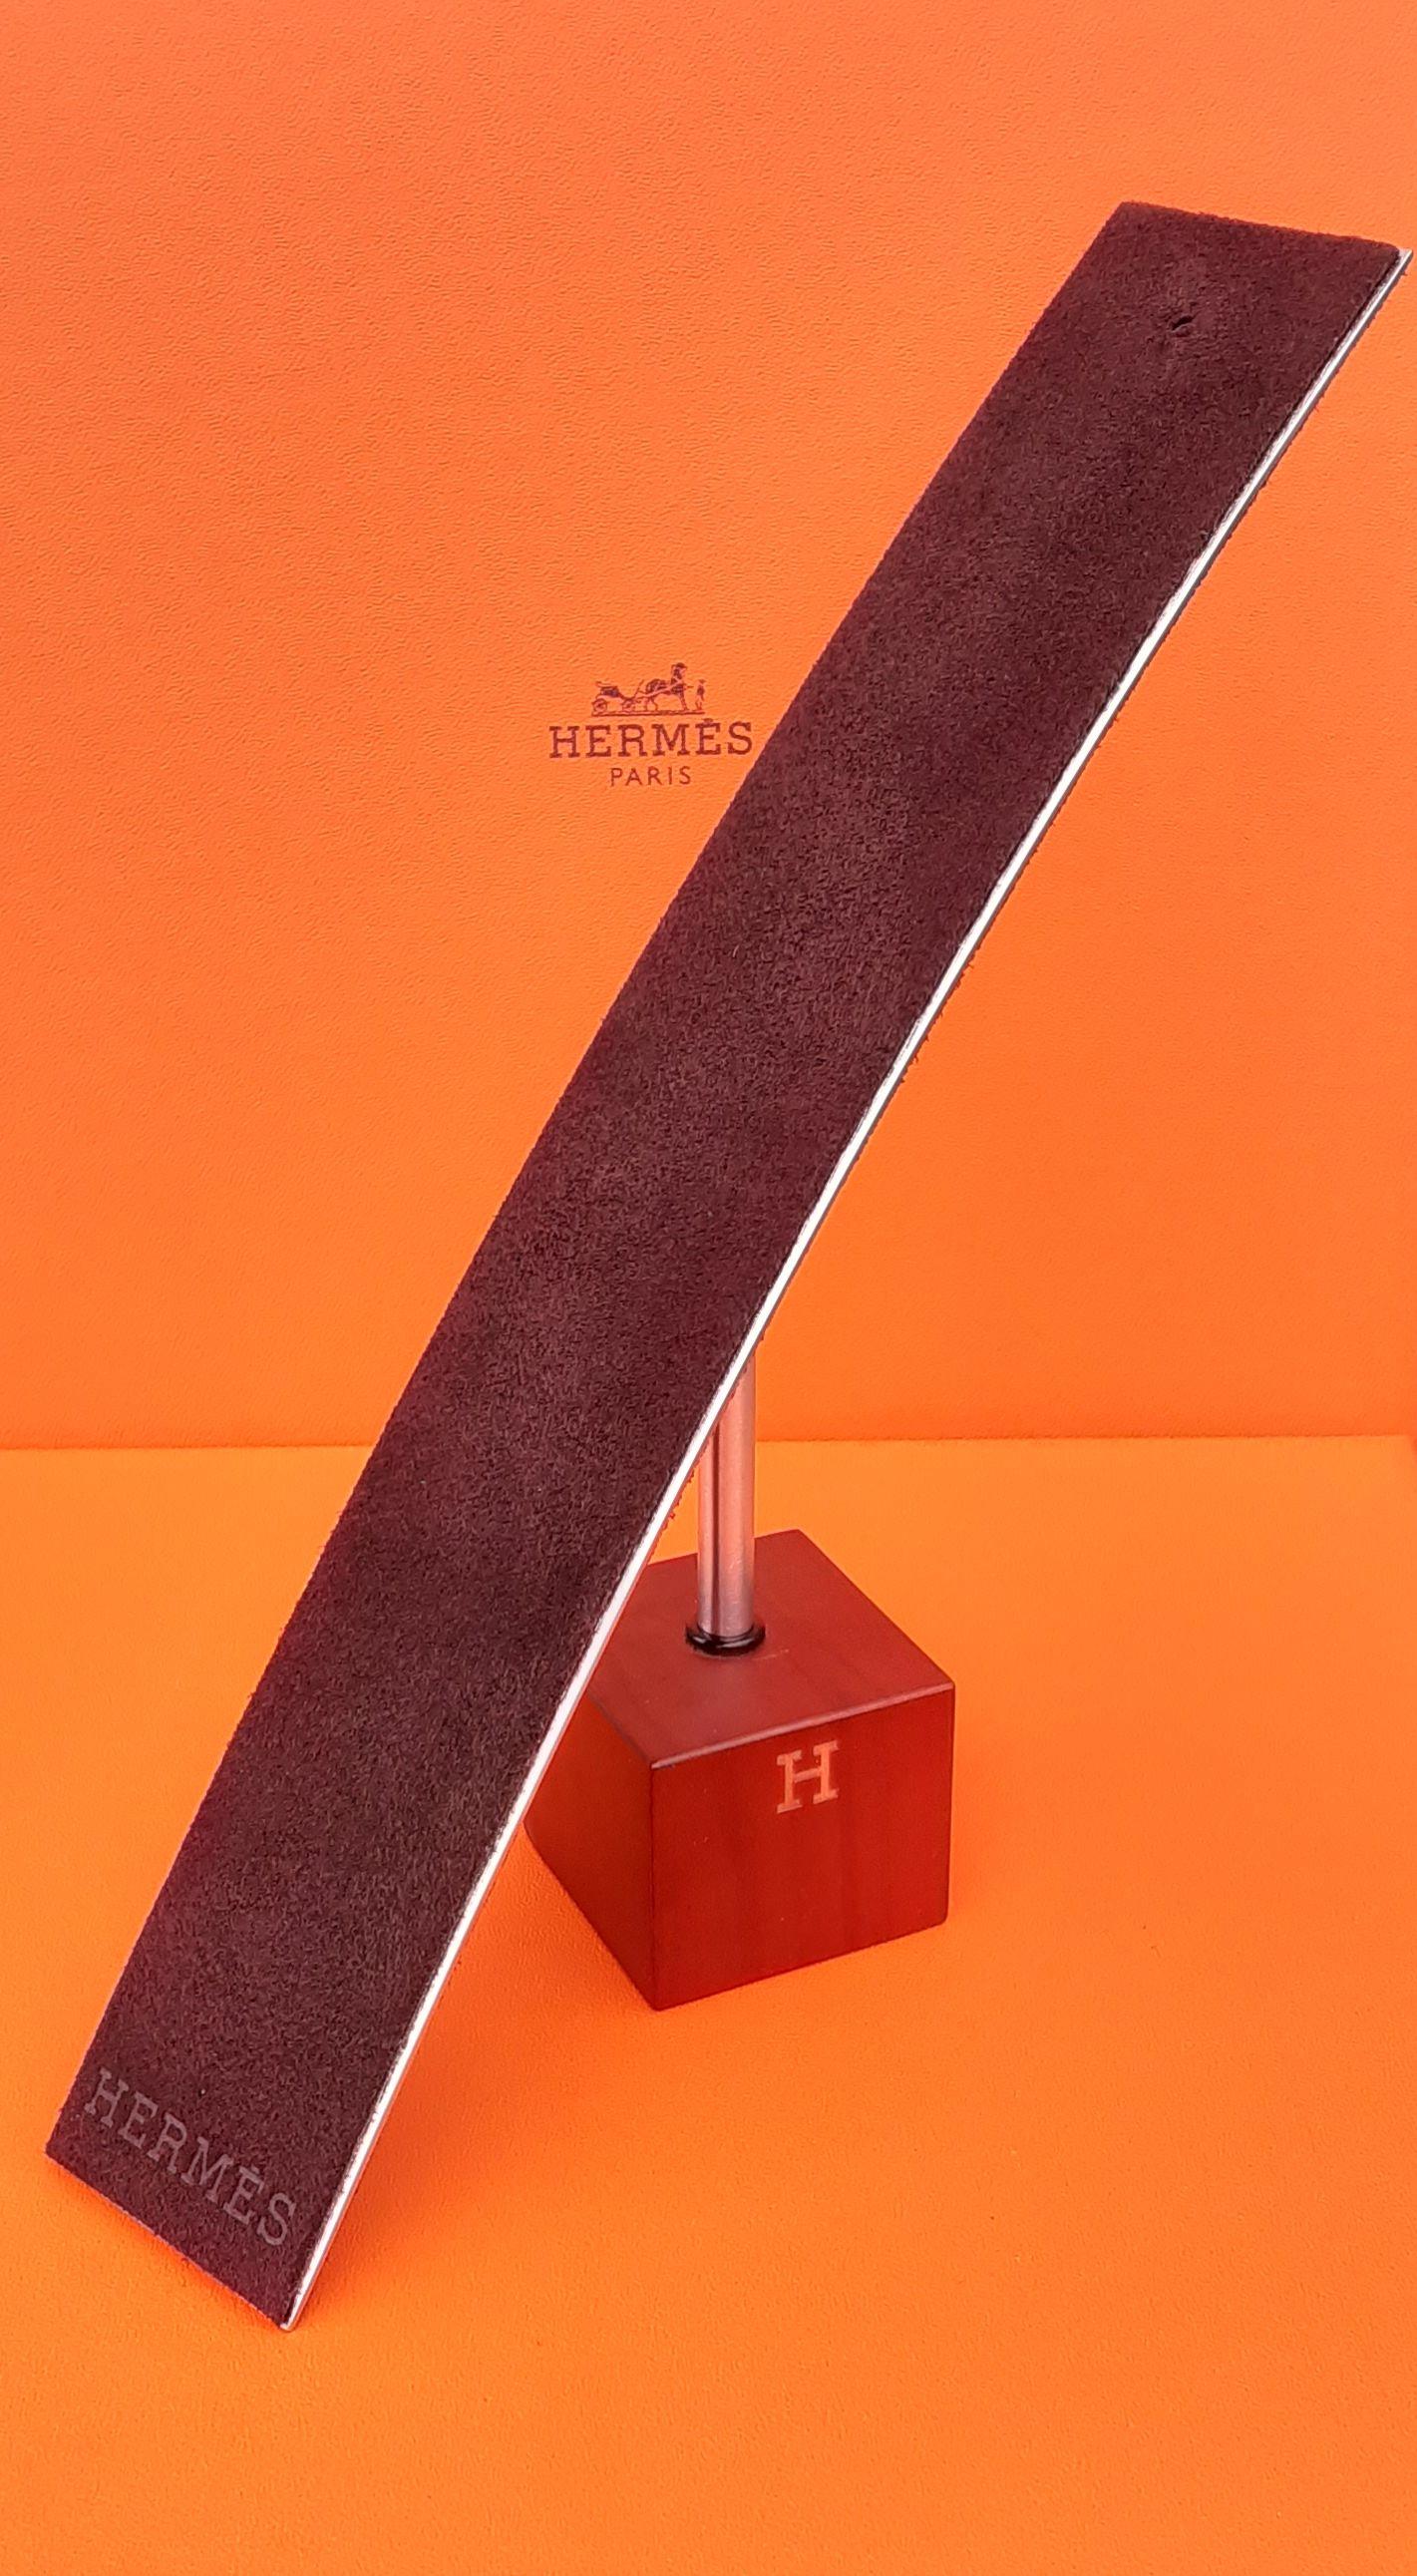 Rare Authentic Hermès Display Stand

Perfect for presenting your watch, necklace, bracelet

Composed of a swivel tray fixed on a wooden base

The tray is in silver metal covered with brown felt

